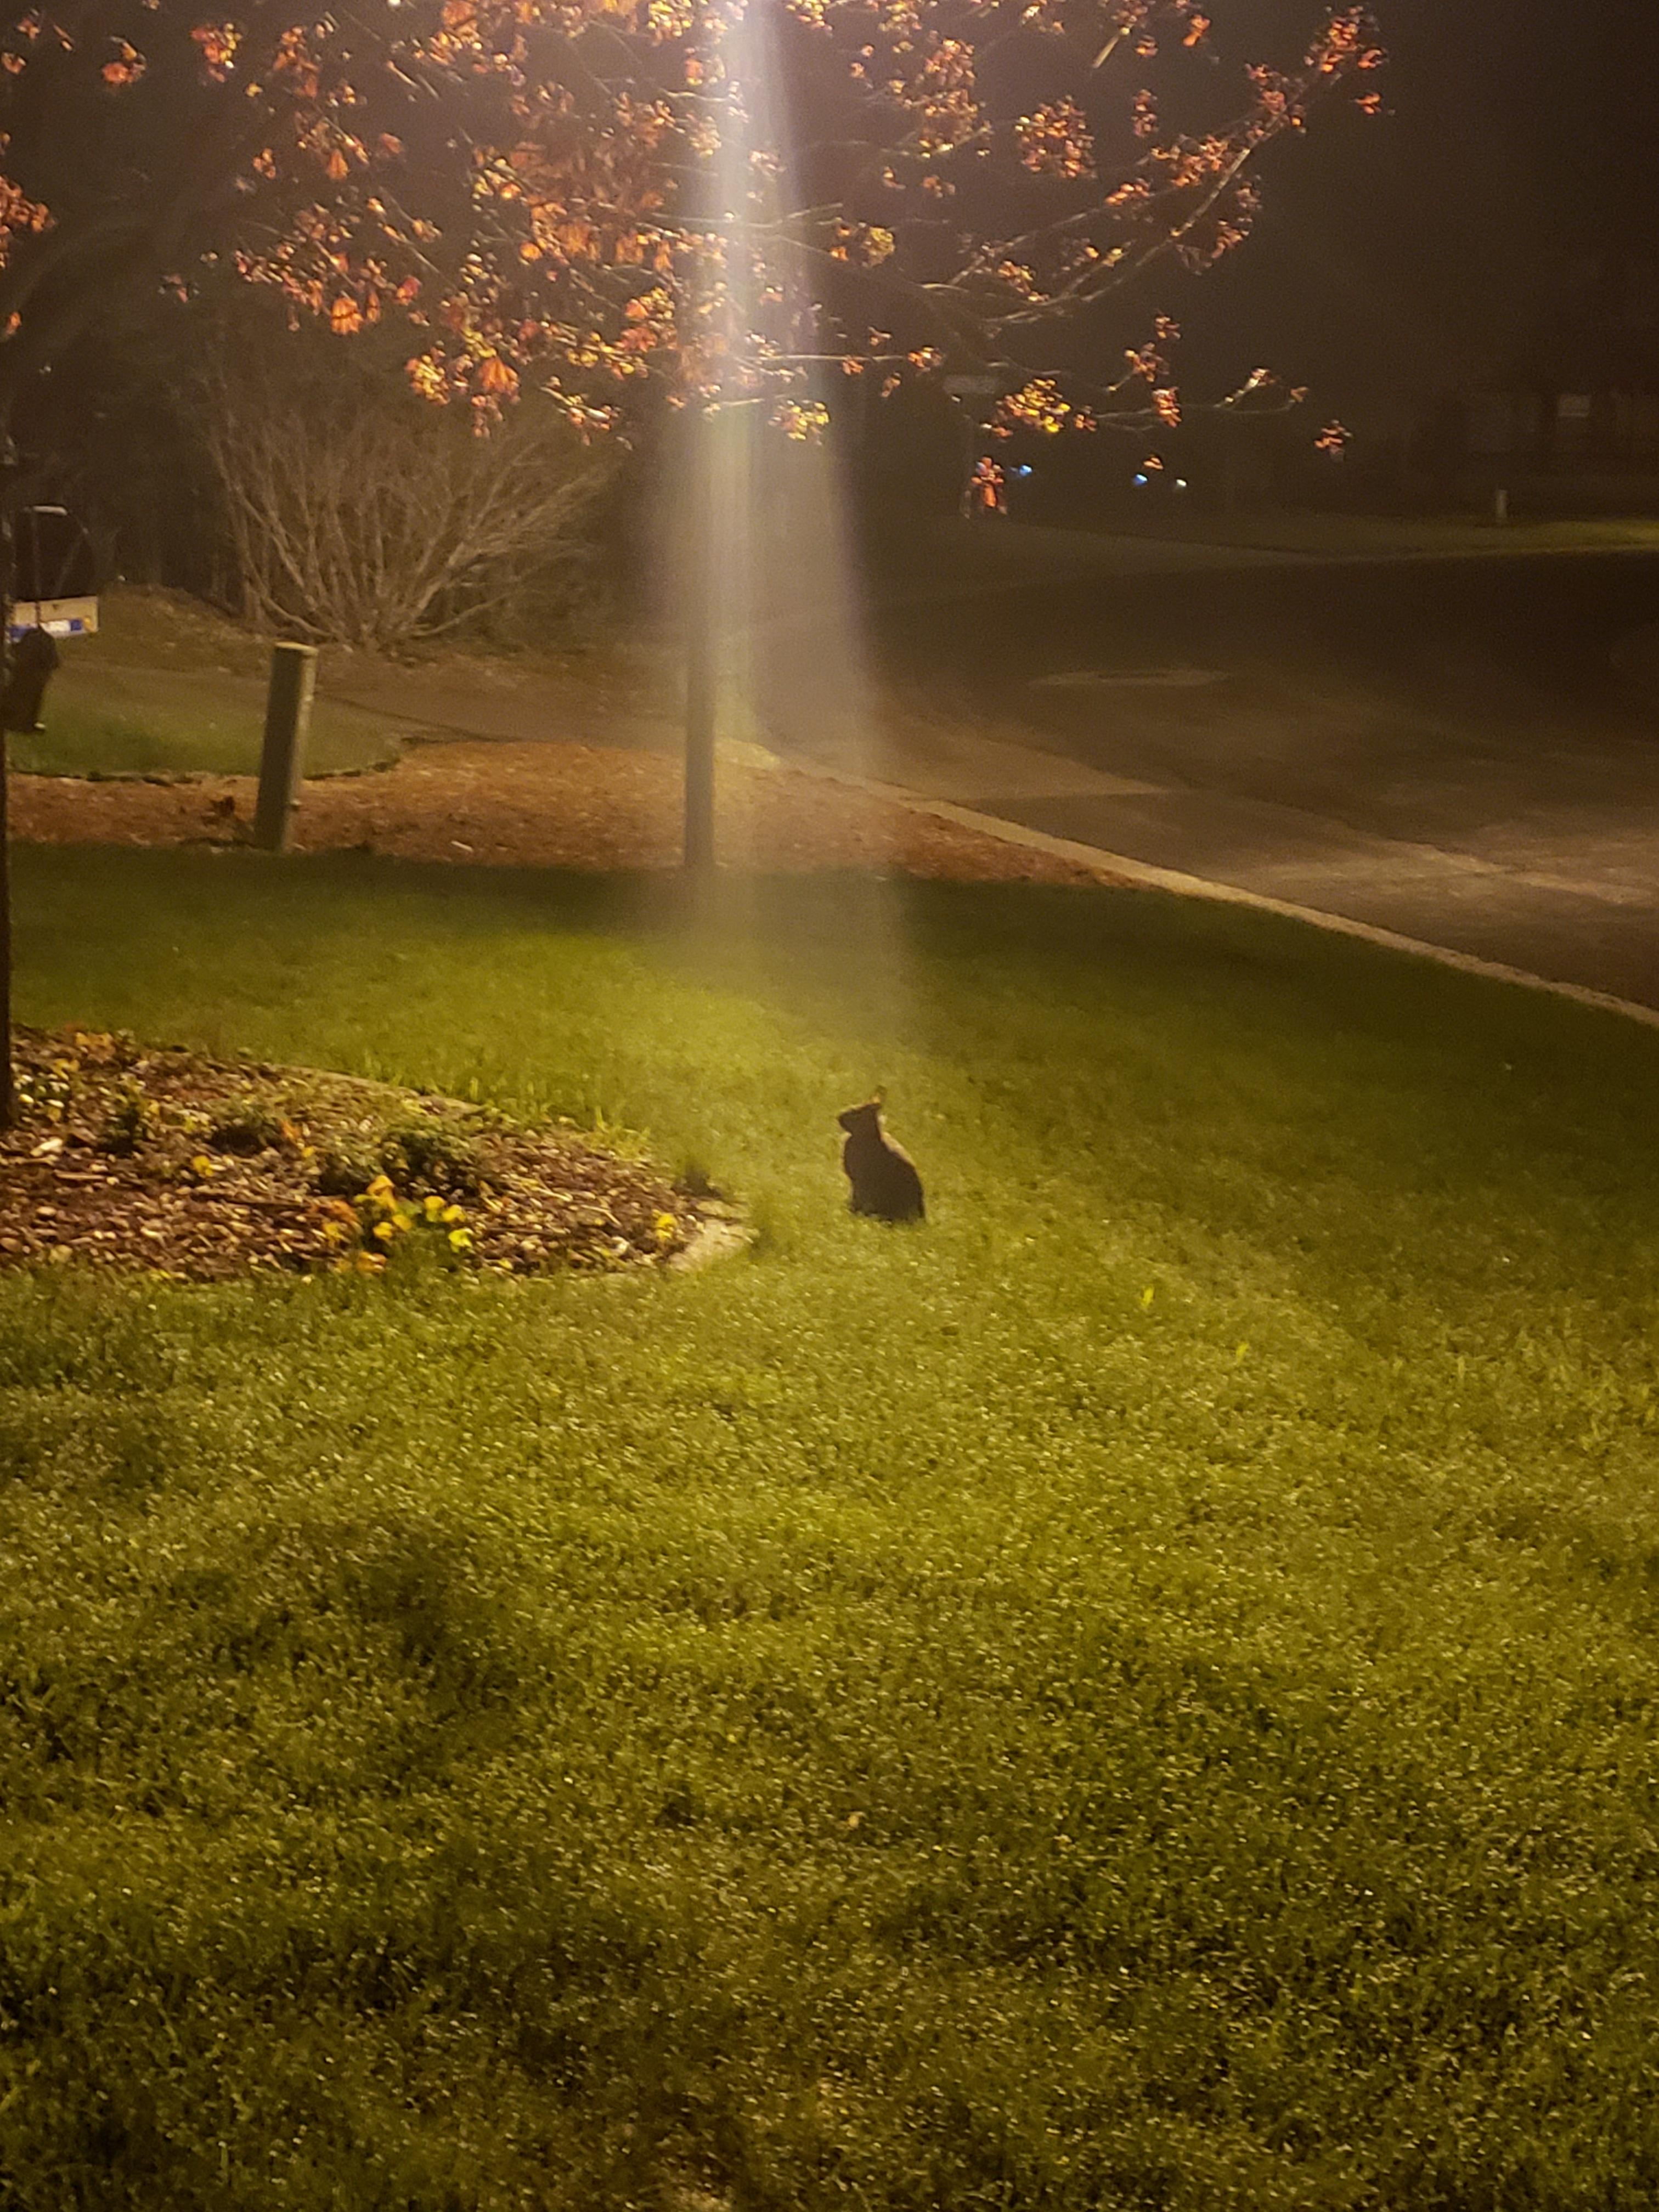 I think this rabbit is getting ready to start a religion...